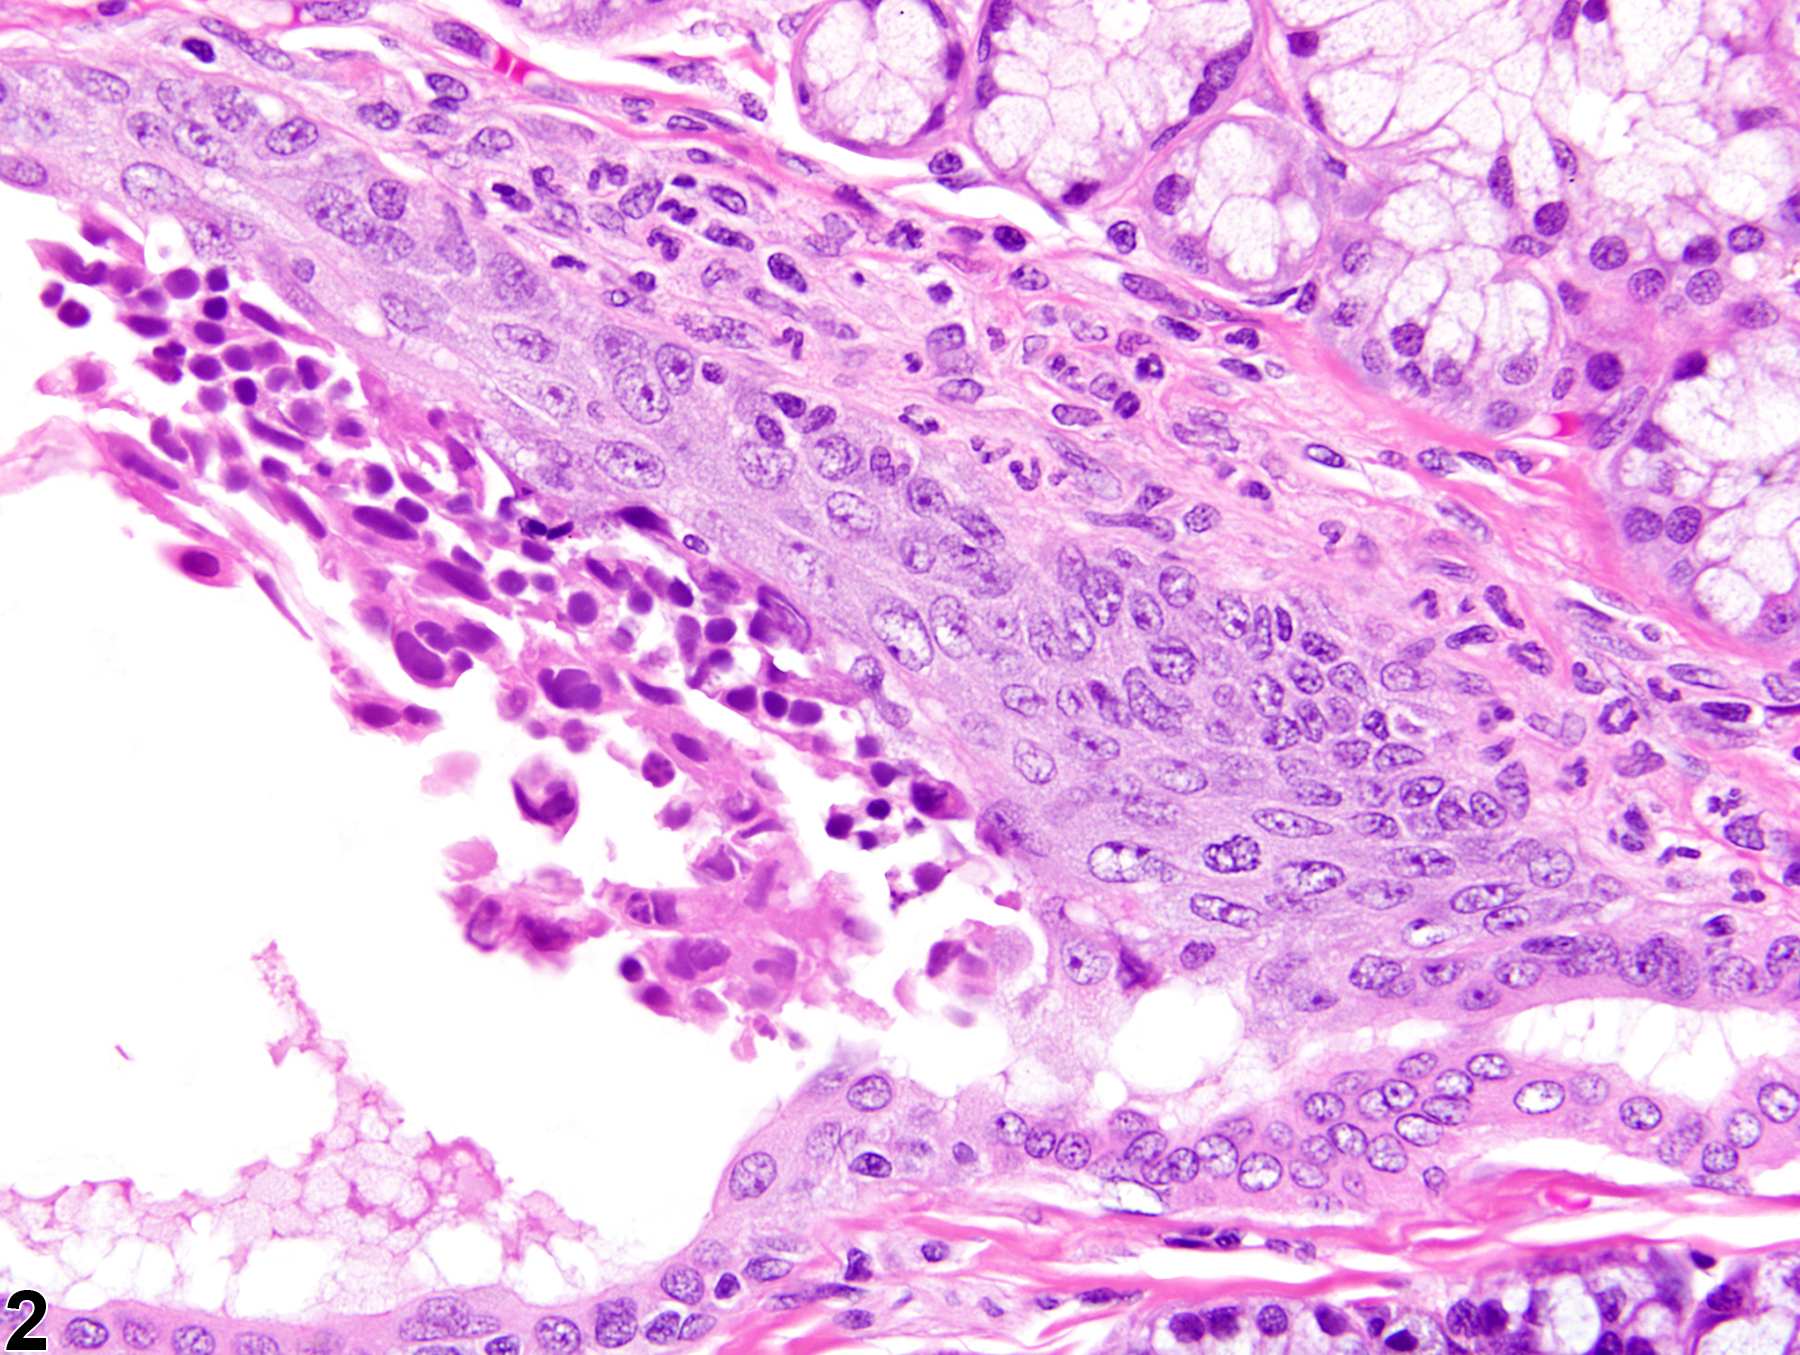 Image of metaplasia, squamous in the salivary gland duct from a male F344/N rat in a chronic study